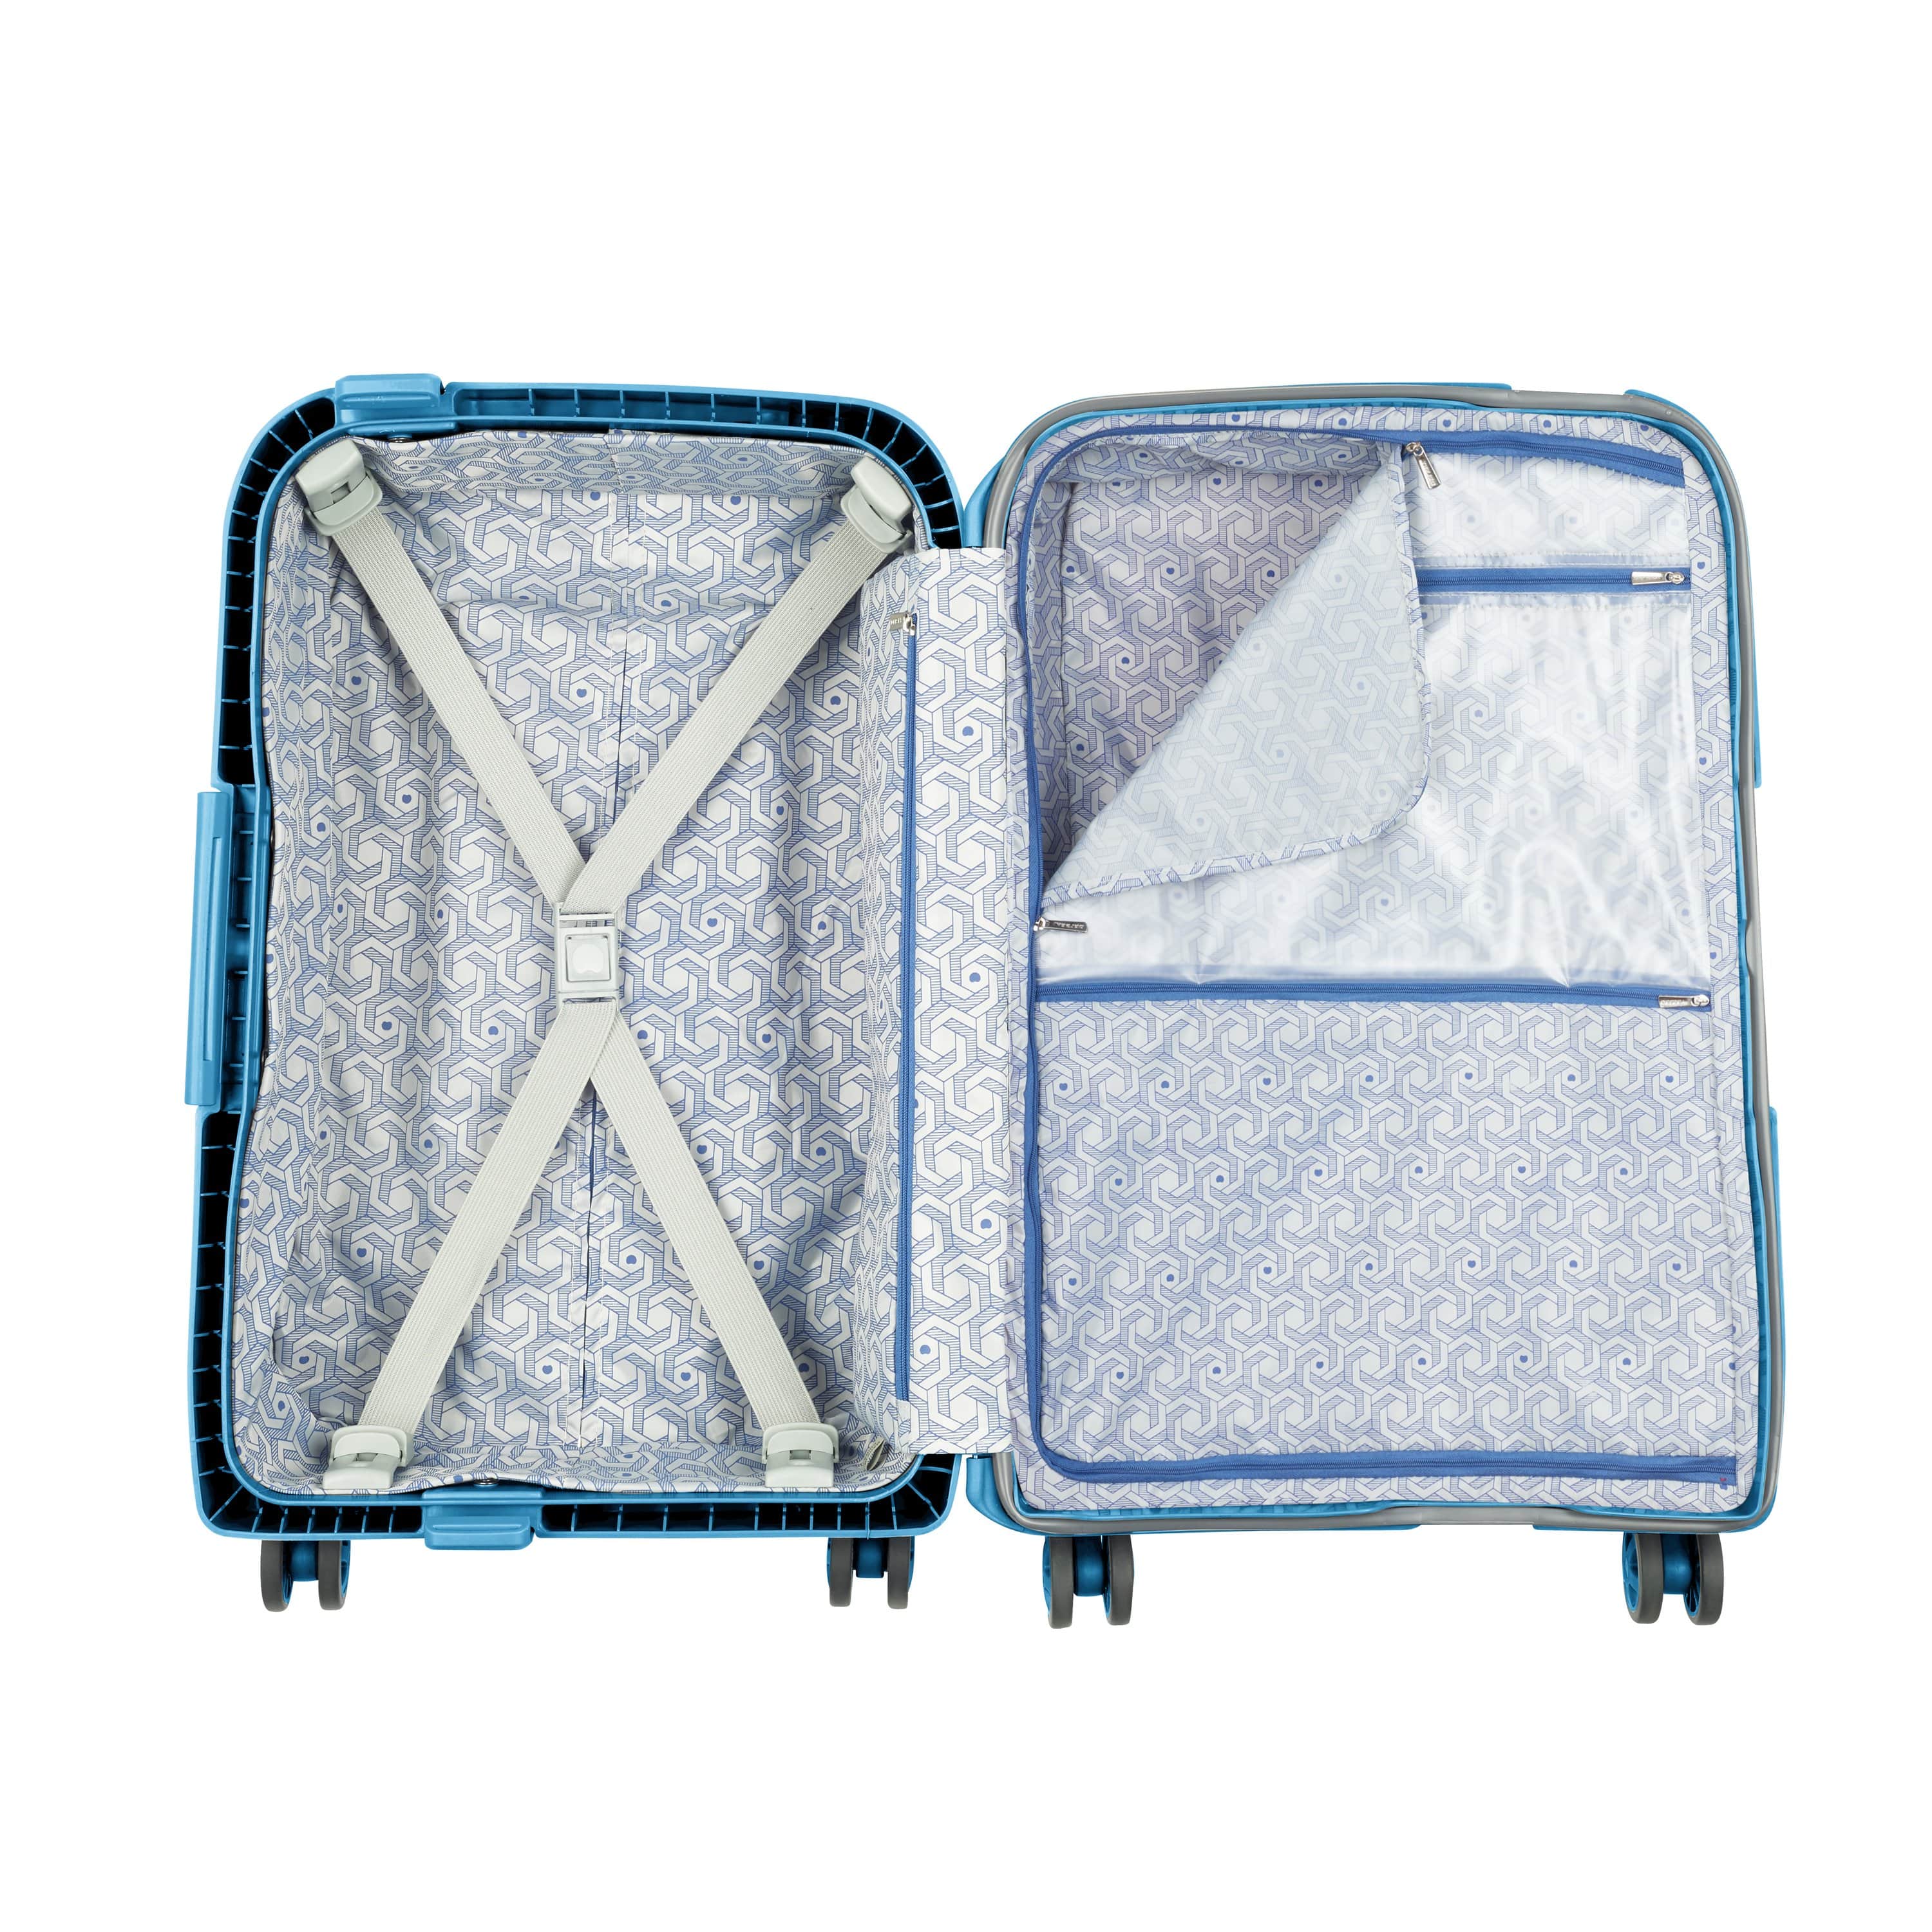 Delsey Moncey 55cm Softcase 4 Double Wheel Cabin Luggage Trolley Light Blue - 00384480112